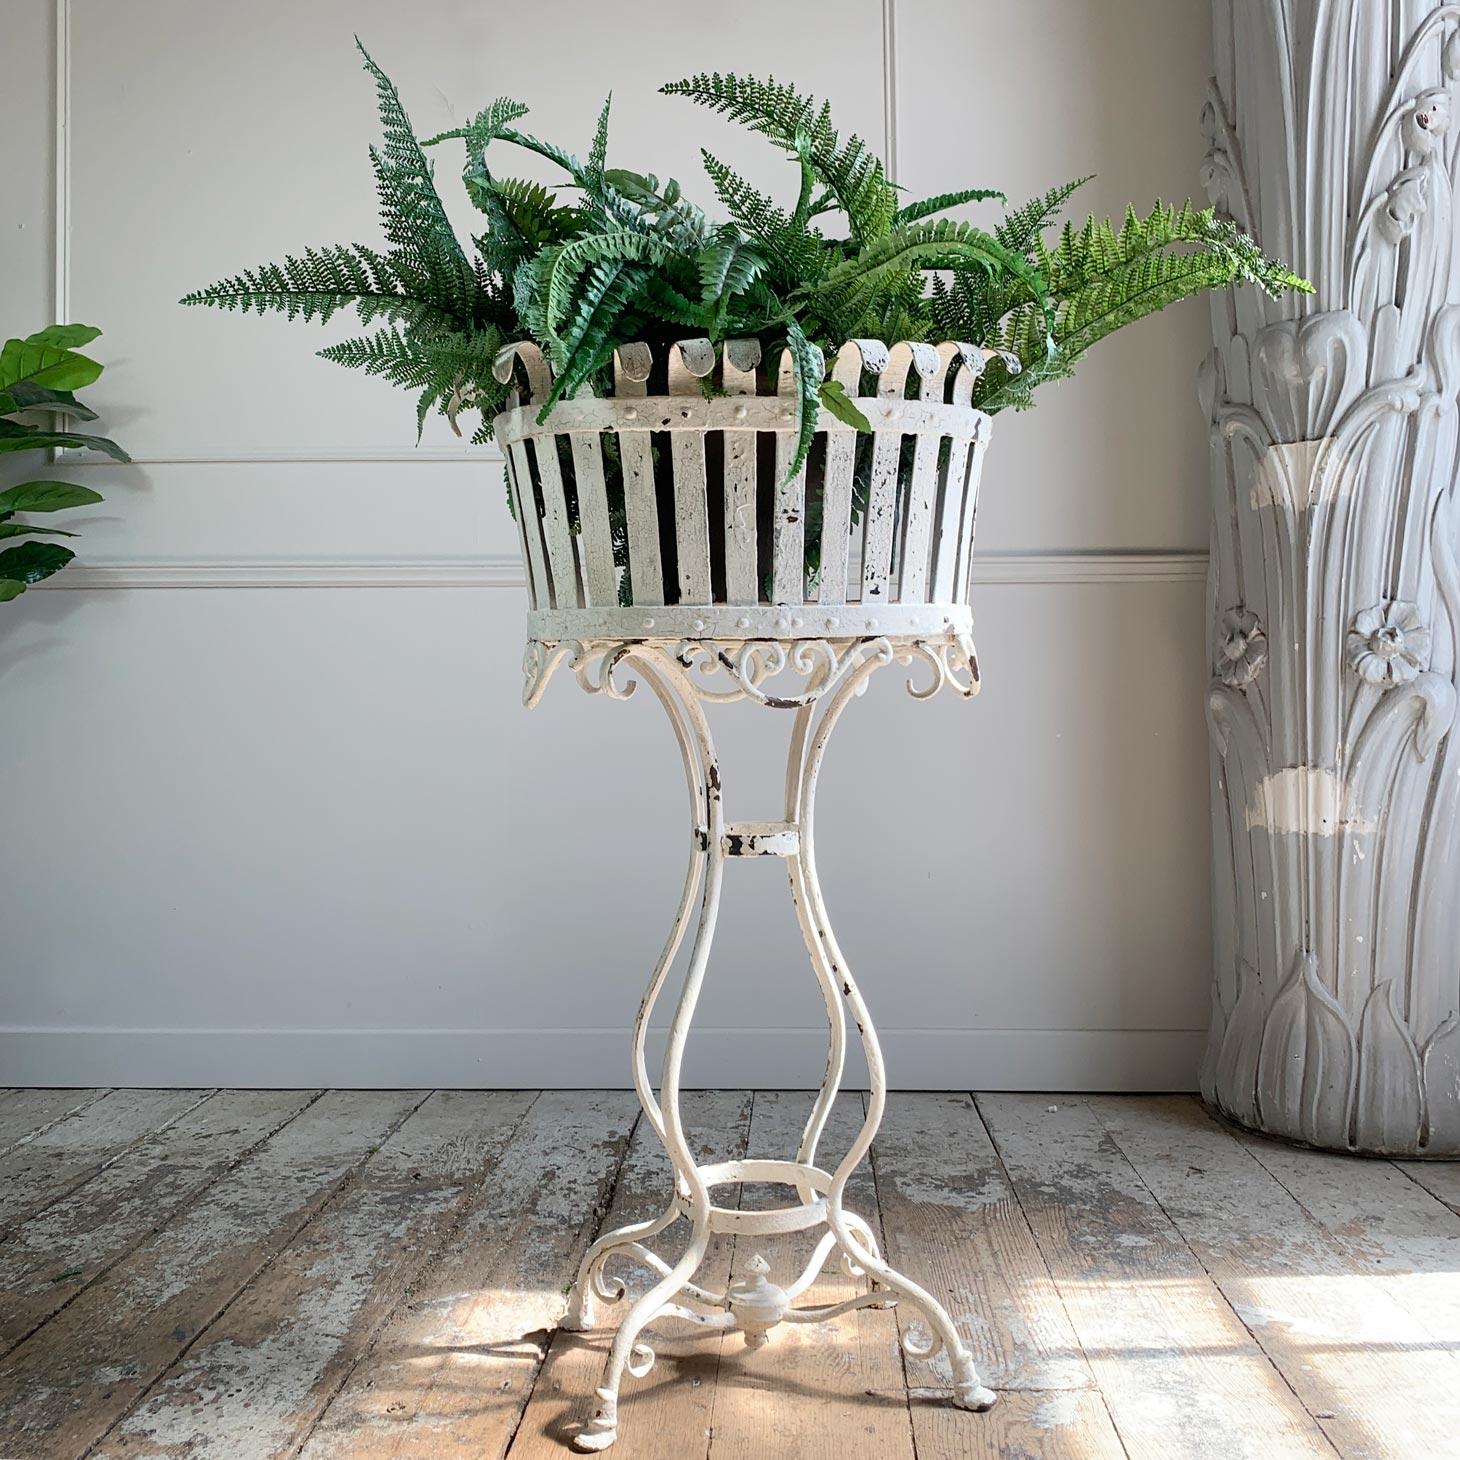 Beautiful and rare Arras planter/jardiniere, this model with the horse hoof feet, dating it to the late 19th/early 20thcentury. The white painted wrought iron and riveted form has crackled in the most perfect way over the years, and the jardiniere